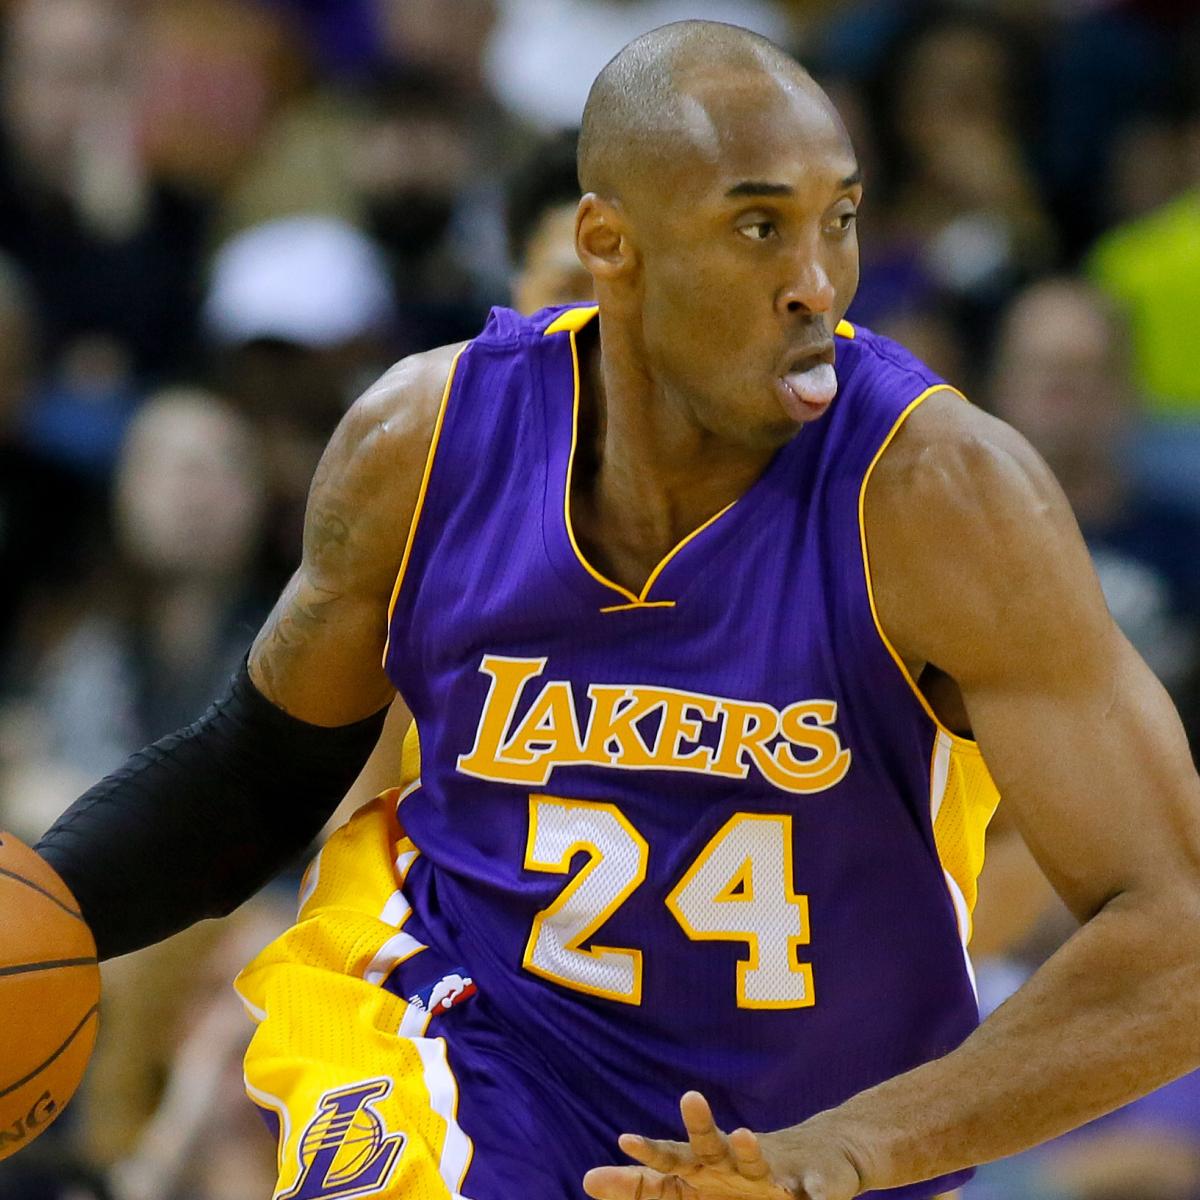 NBA Christmas 2015, Lakers vs. Clippers results: 3 things from the